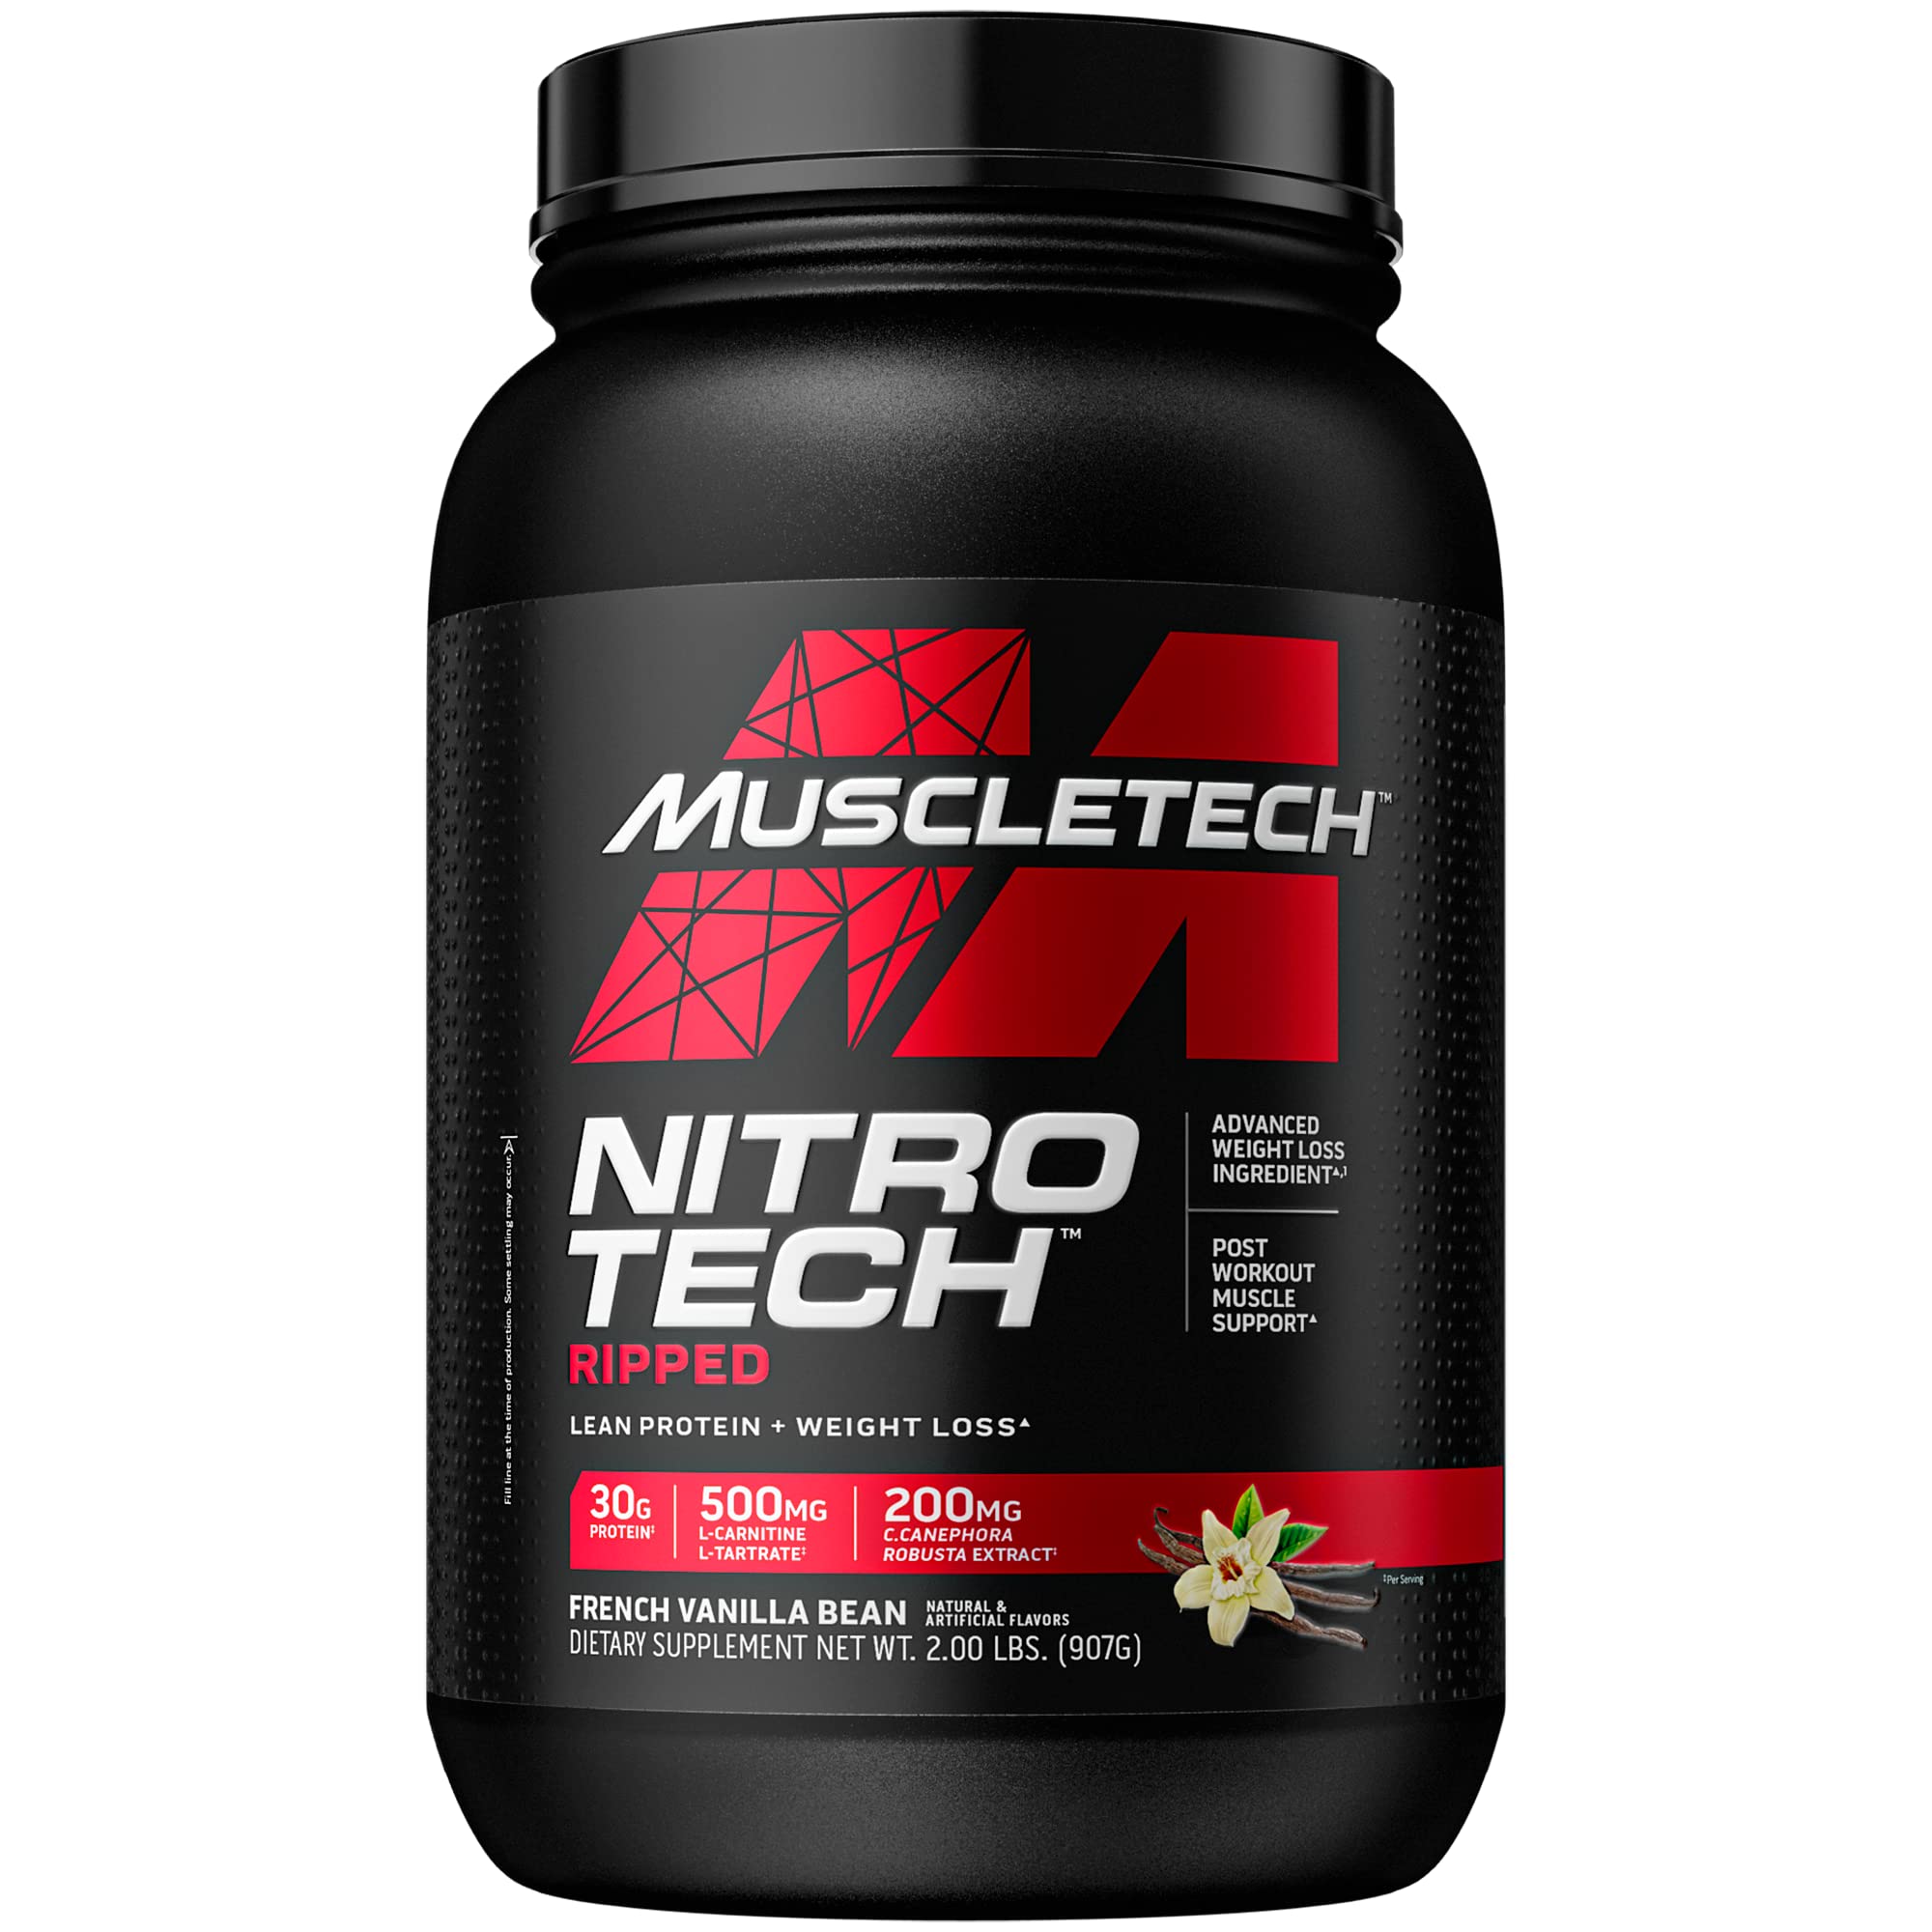 Protein Powder for Weight Loss - MuscleTech Nitro-Tech Ripped - Whey Protein Powder + Weight Loss Formula - Lose Weight - Weight Loss Protein Powder for Women & Men - Vanilla, 2 lb(package may vary)